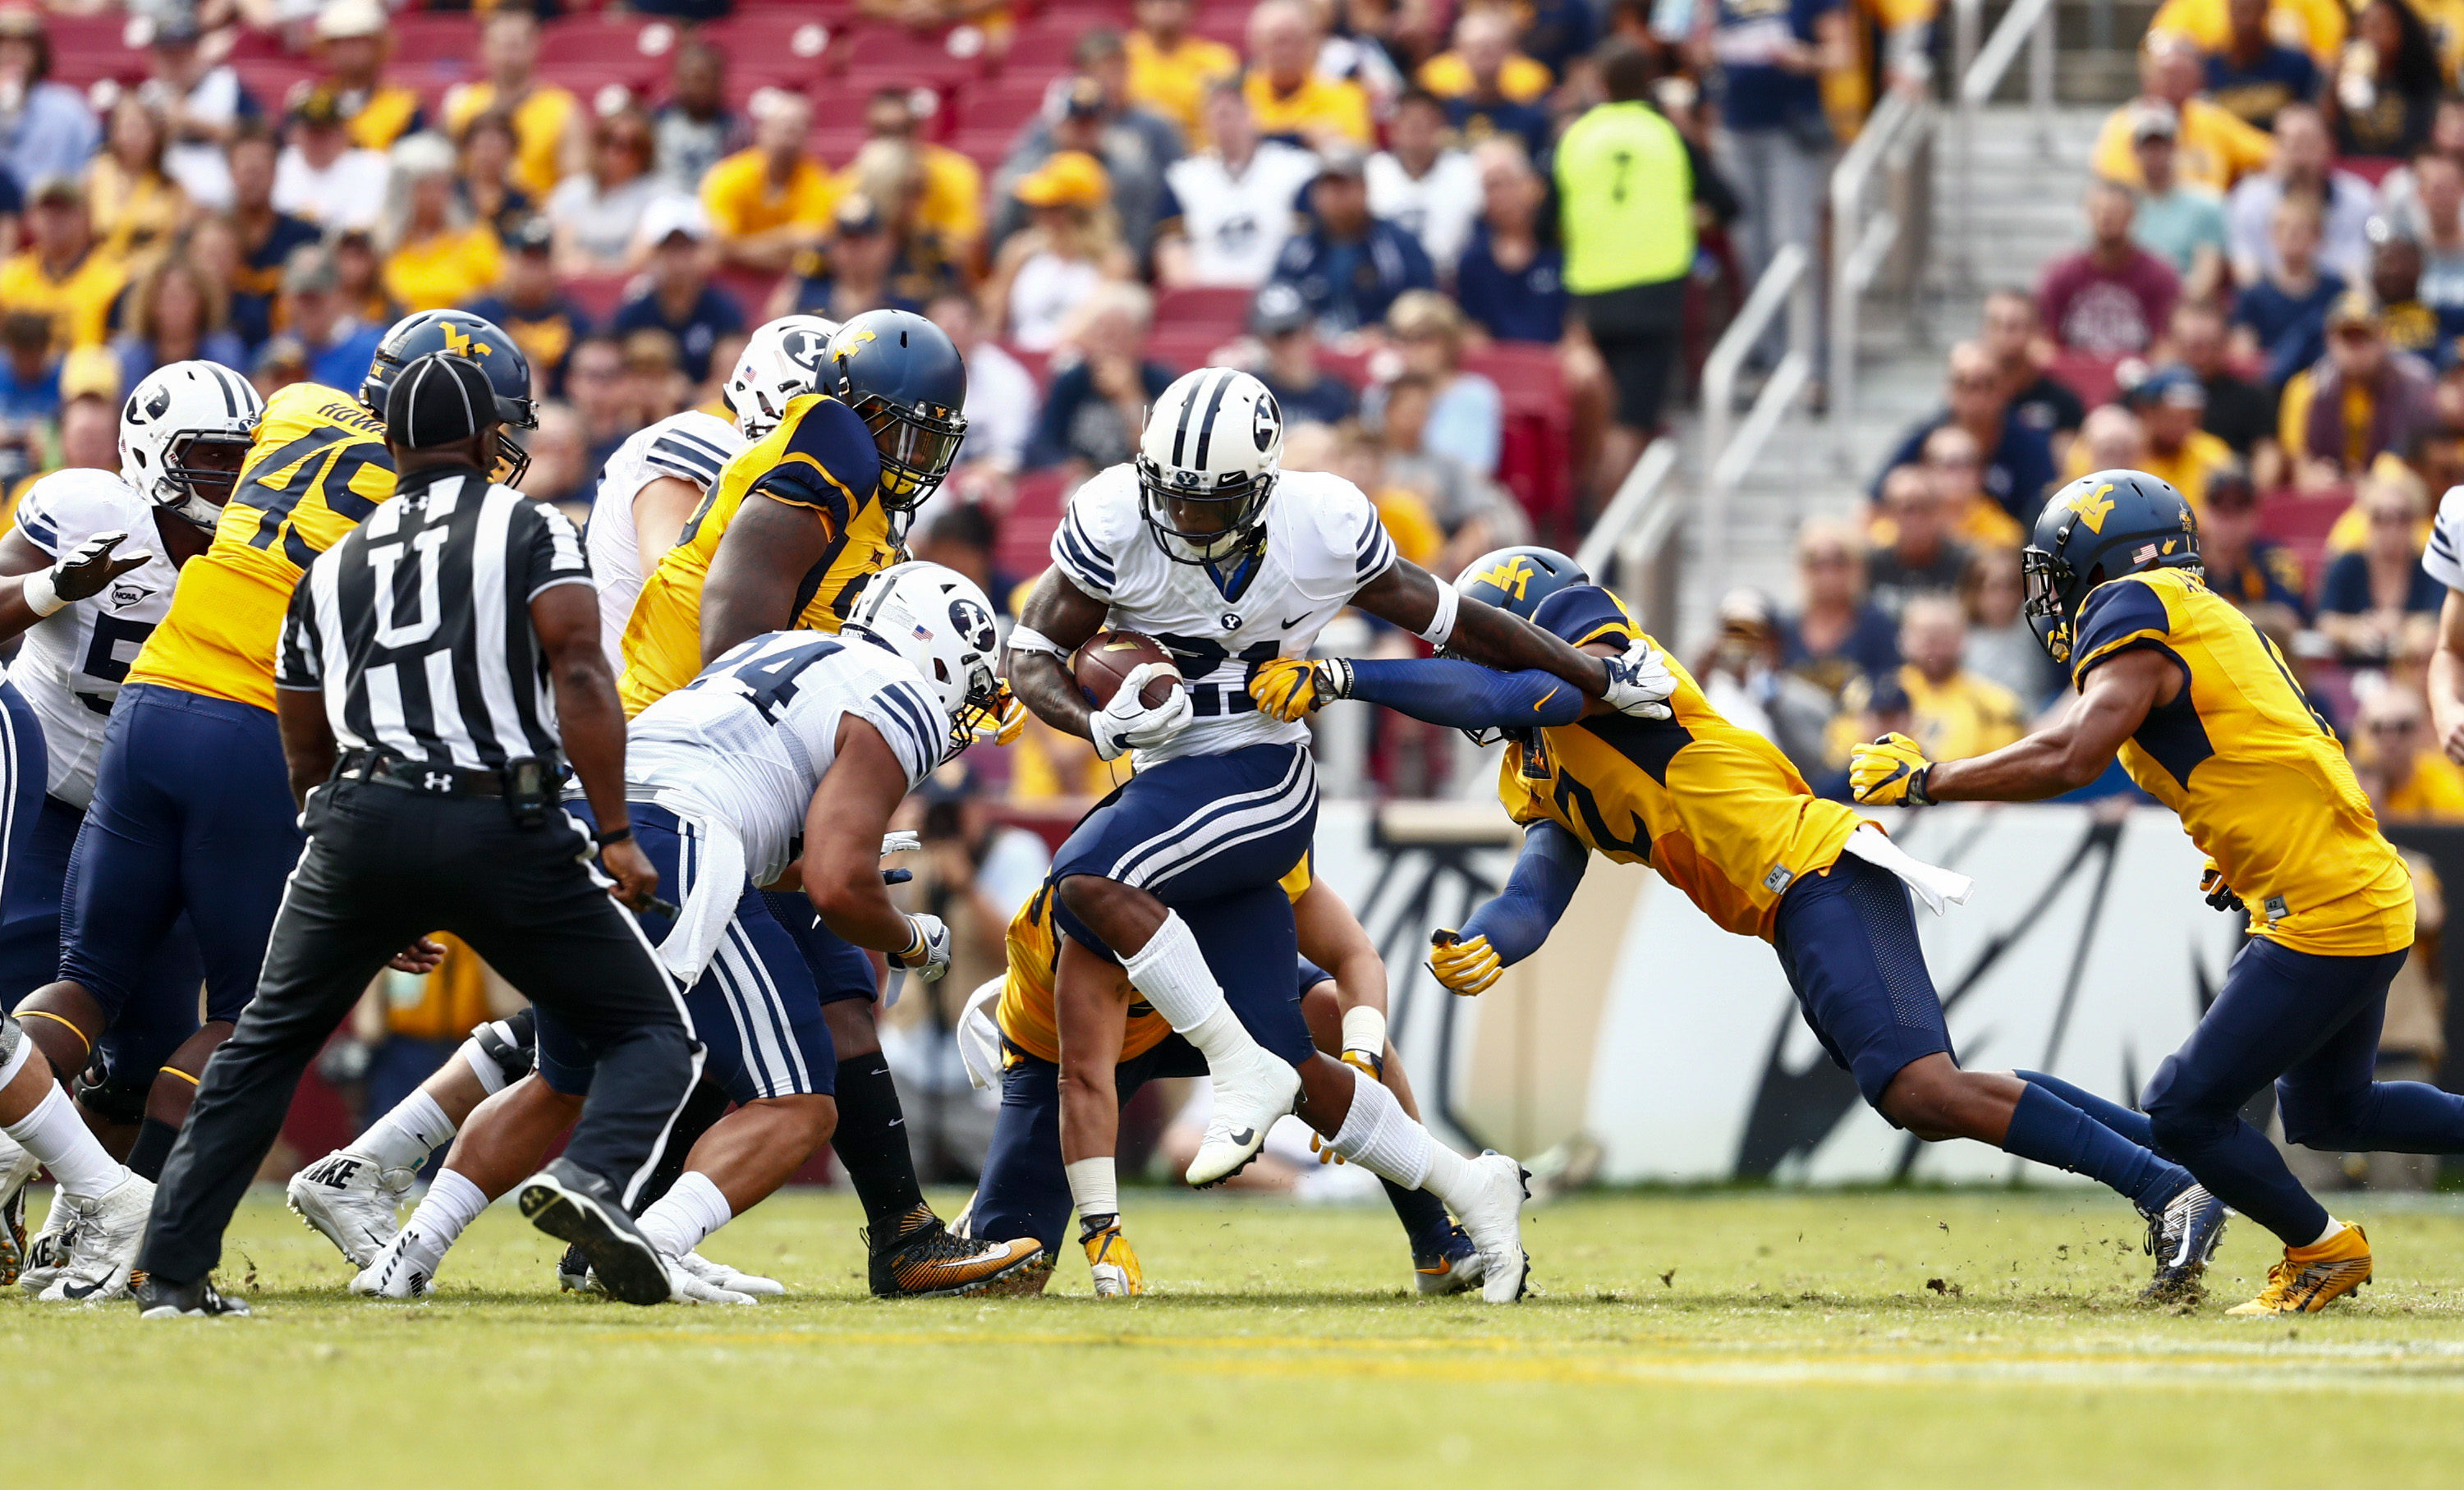 BYU running back Jamaal Williams carries the ball against West Virginia. The Cougars fell 35-32. (BYU Photo)